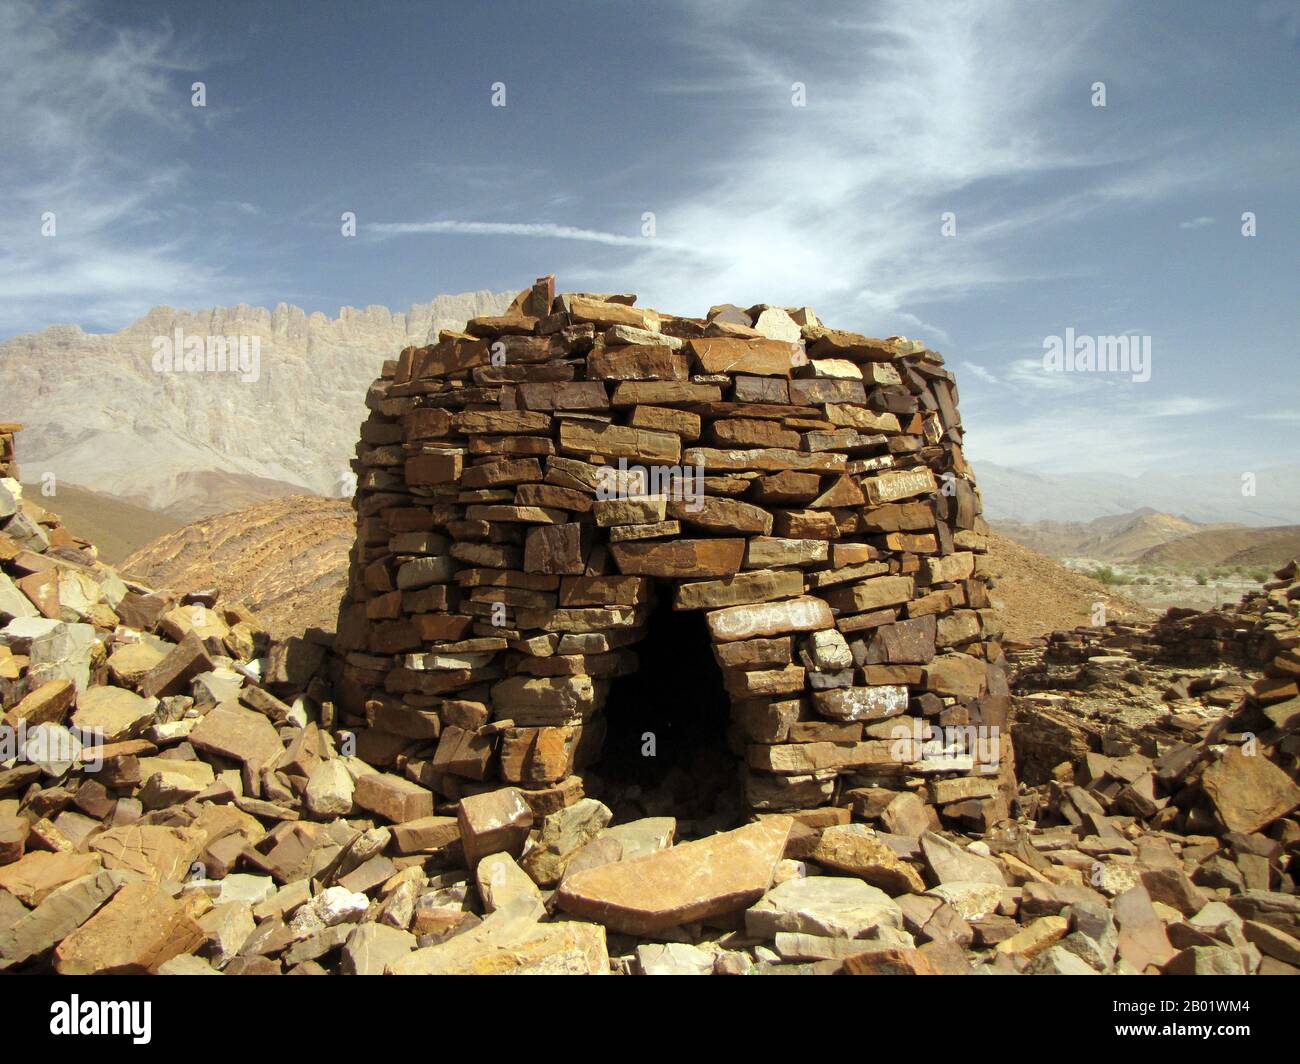 Oman: Ancient stone tomb at Al Ayn, near Bat, c. 3500-2500 BCE.  The earliest stone-built tombs which can be called 'beehive', are in Oman, built of stacked flat stones which occur in nearby geological formations. They date to between 3500 and 2500 years BCE, to a period when the Arabian peninsula was subject to much more rainfall than now, and supported a flourishing civilisation in what is now desert, to the west of the mountain range along the Gulf of Oman.  No burial remains have ever been retrieved from these 'tombs', though there seems no other purpose for their building. Stock Photo